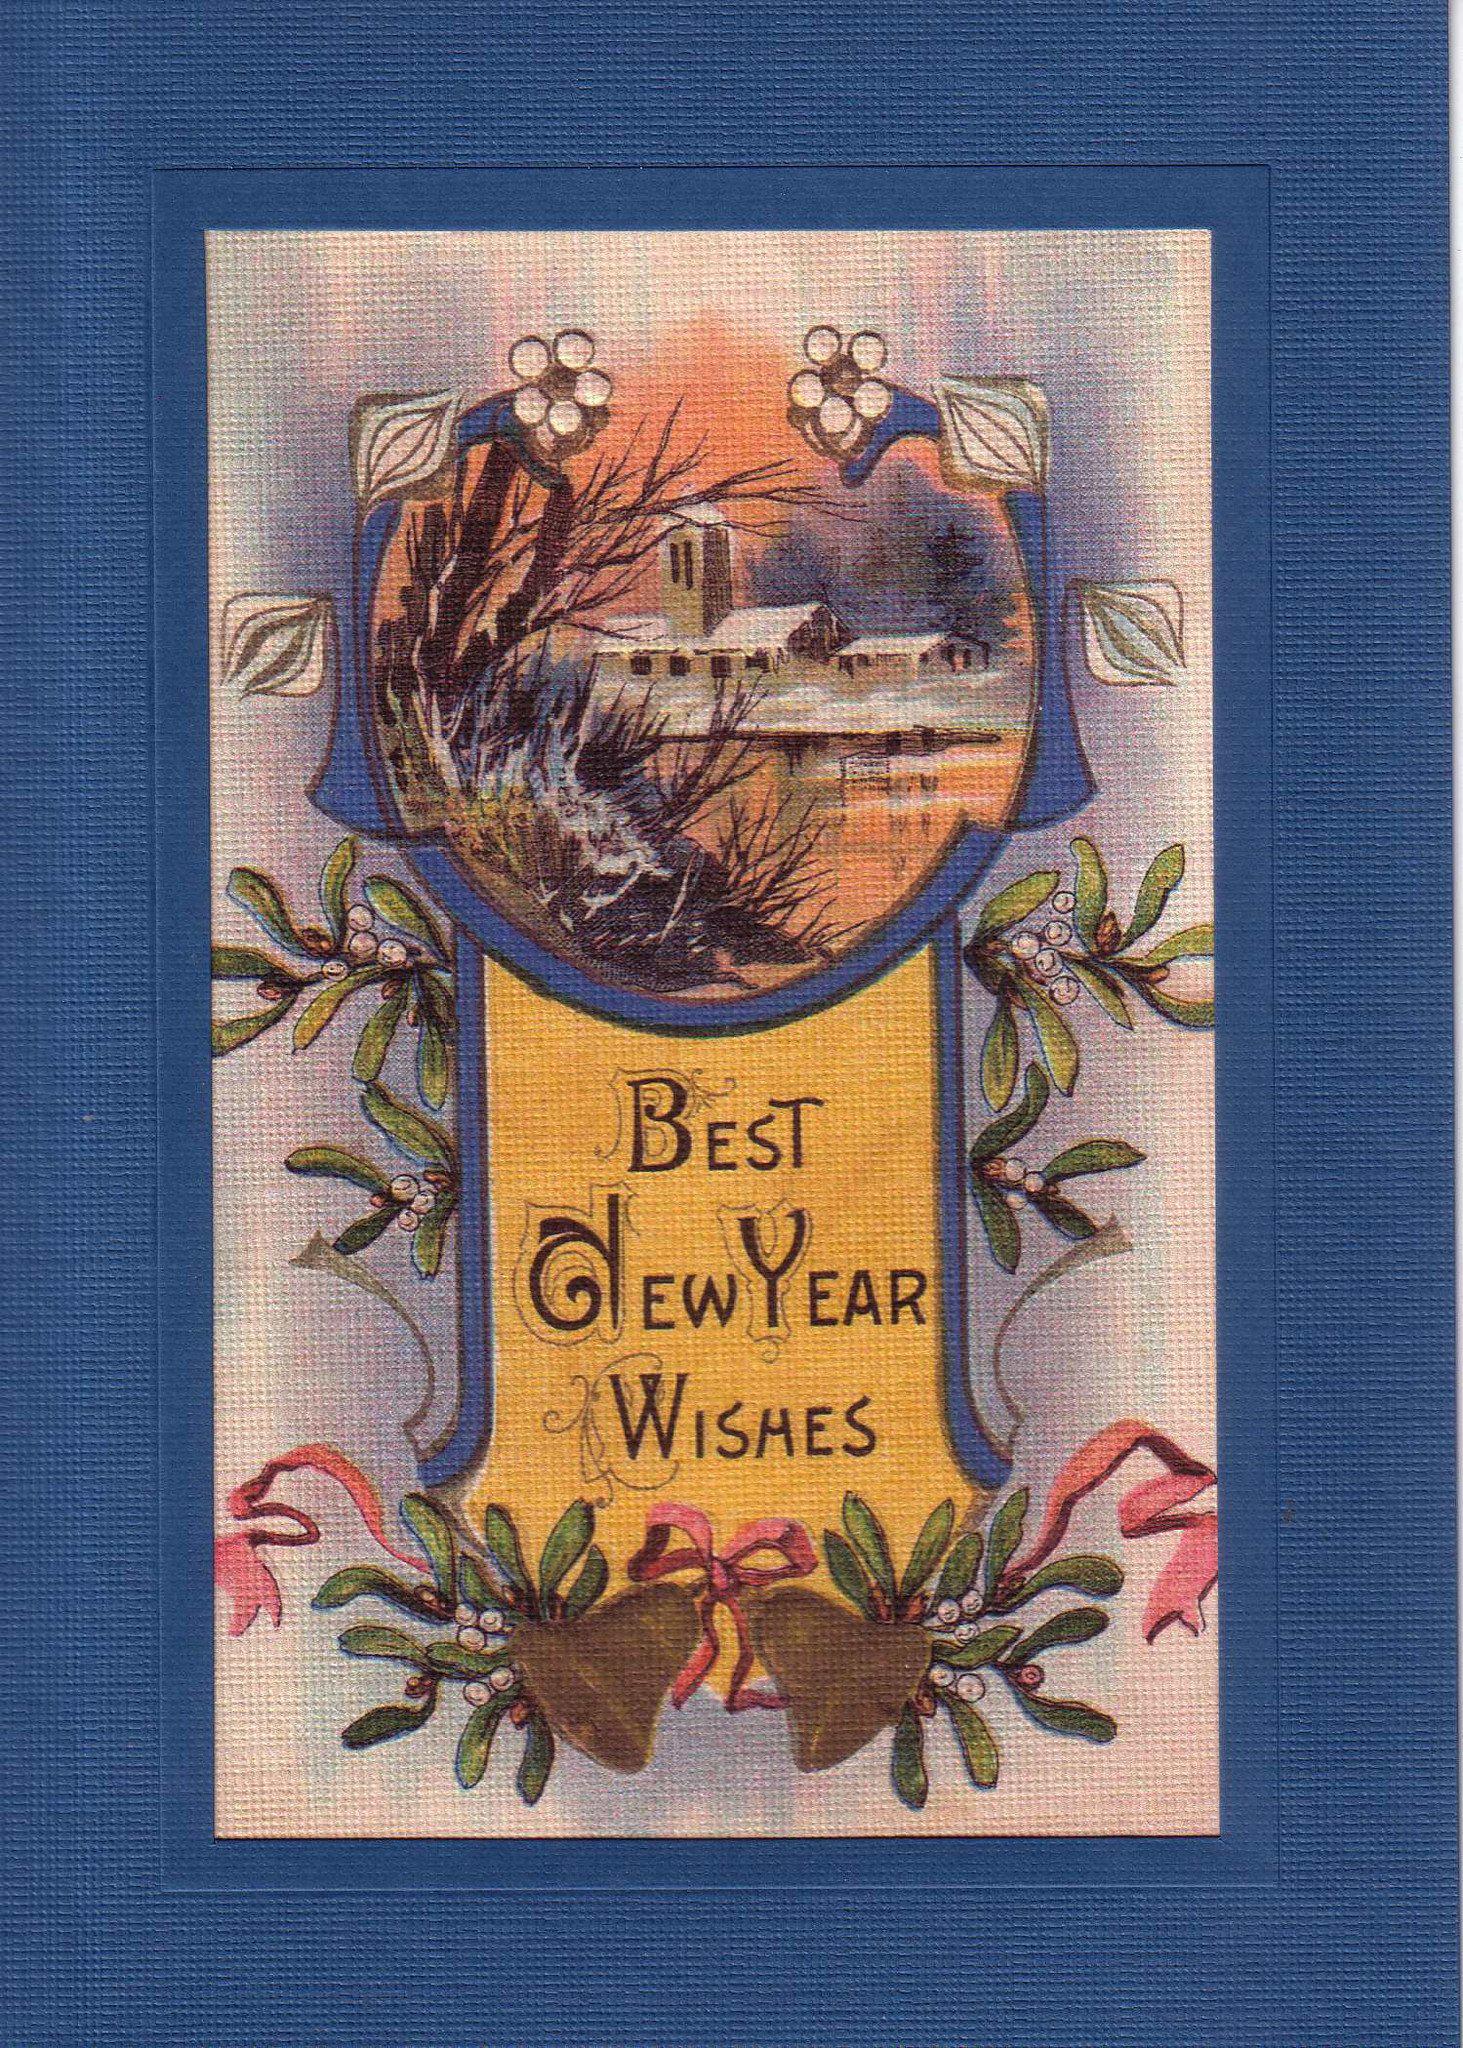 Best New Year Wishes-Greetings from the Past-Plymouth Cards